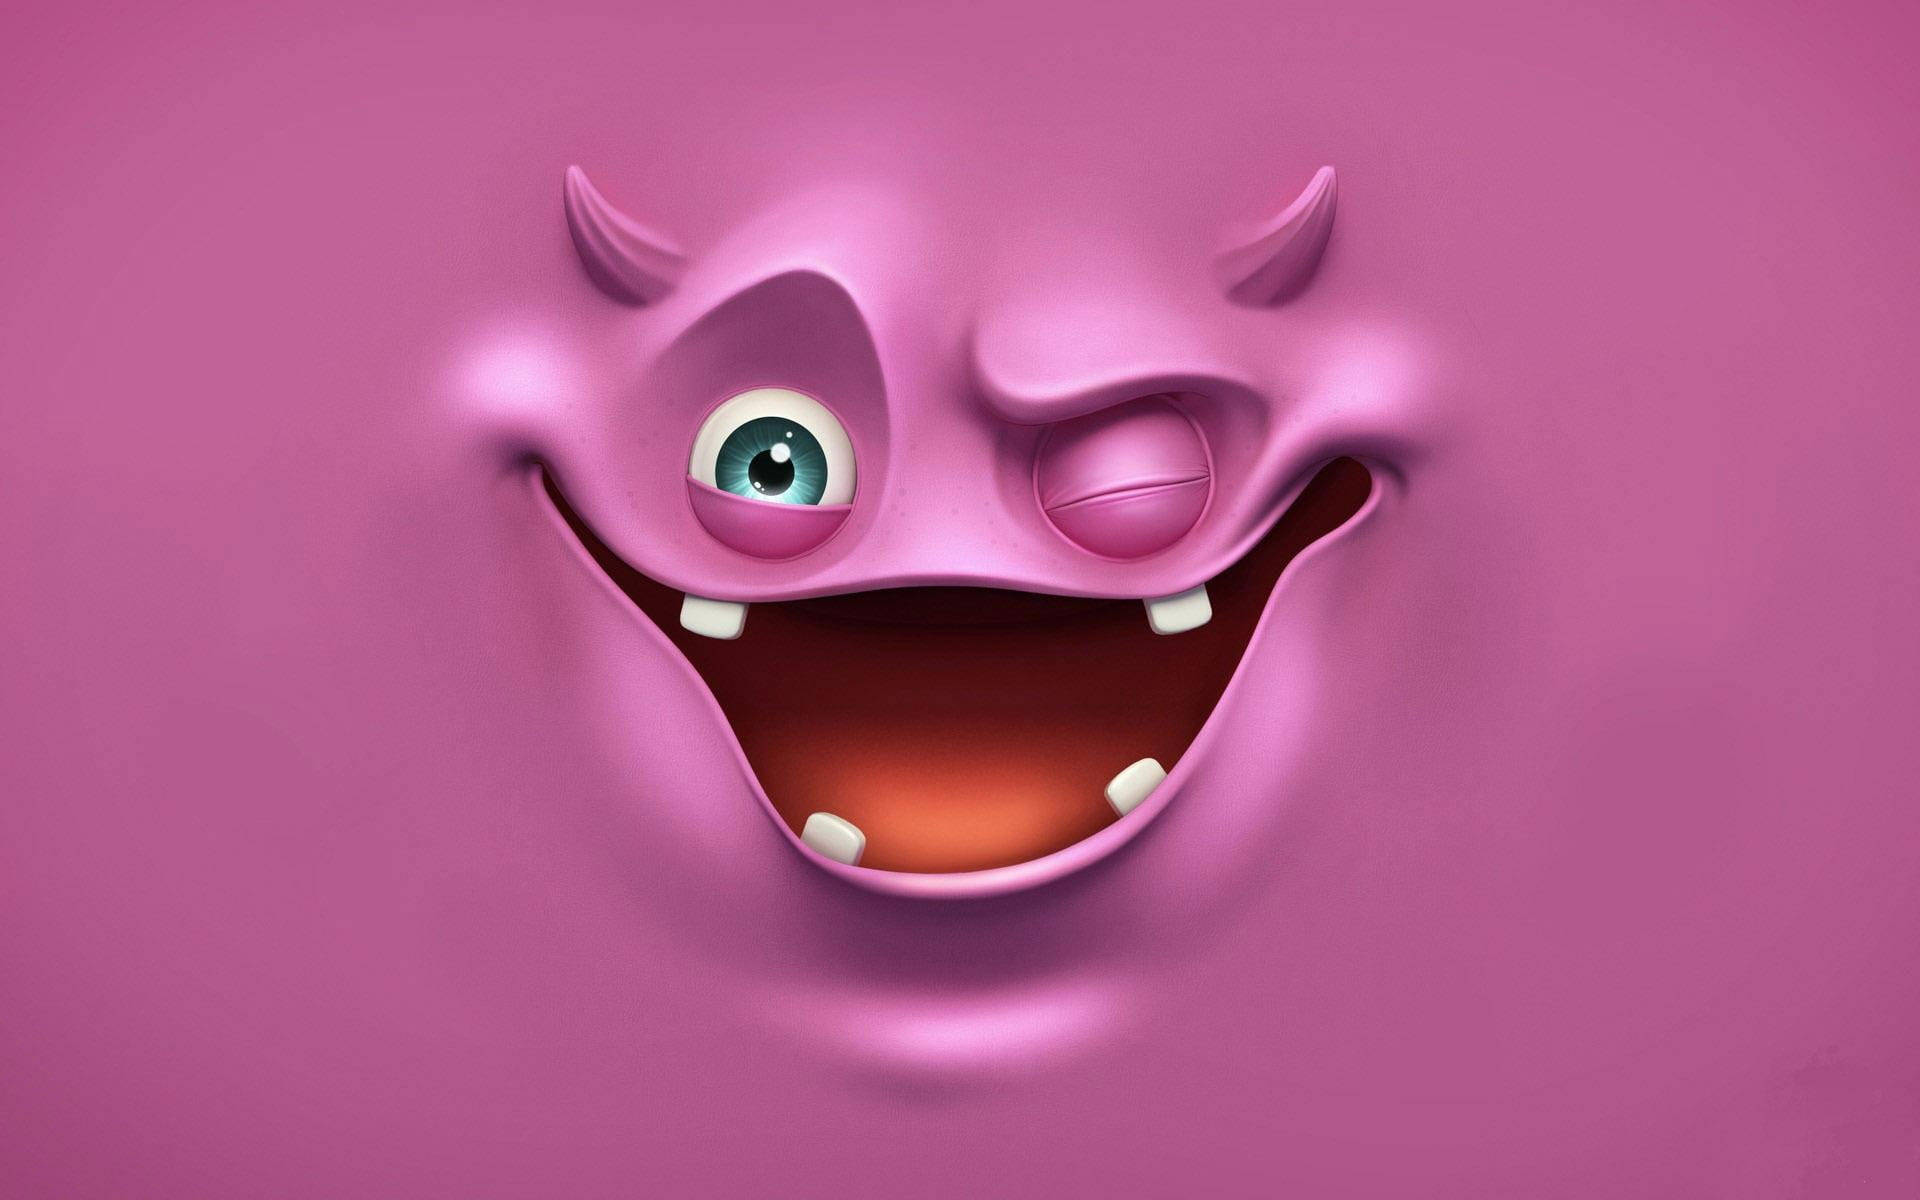 A pink cartoon monster with horns and a big smile - Slime